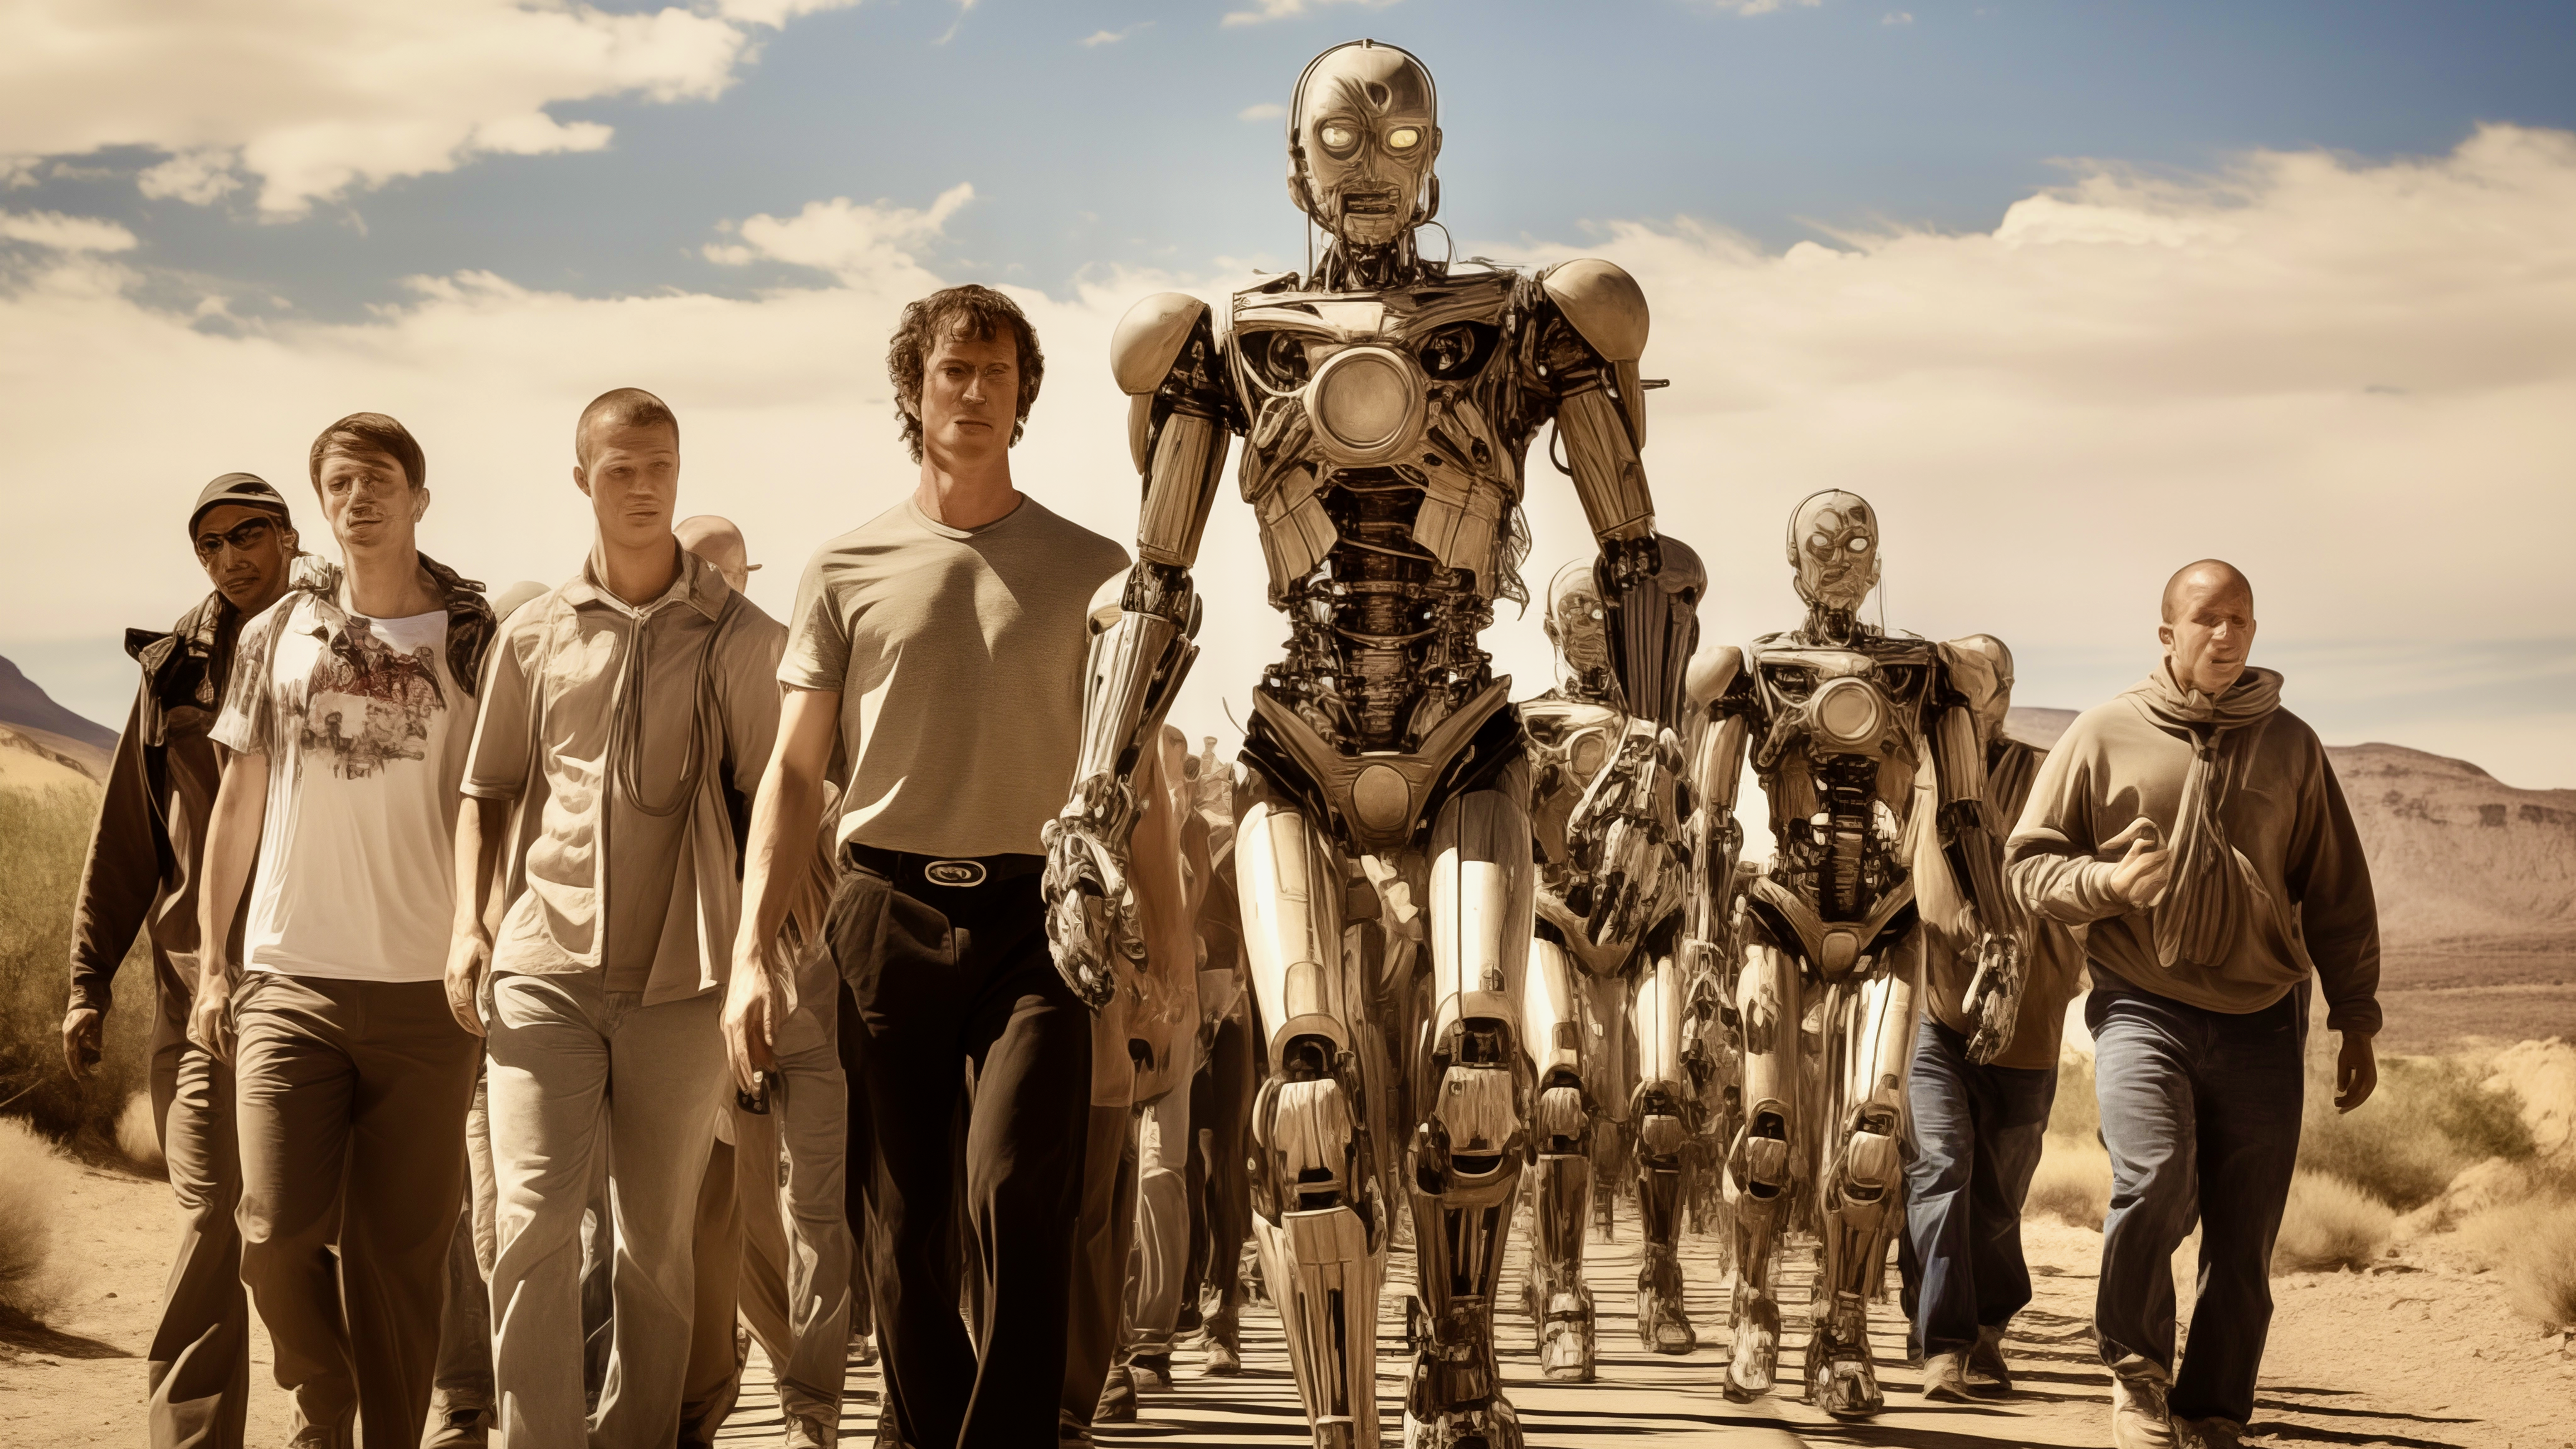 Group of humans and humanoid robots walking towards you on a dusty road